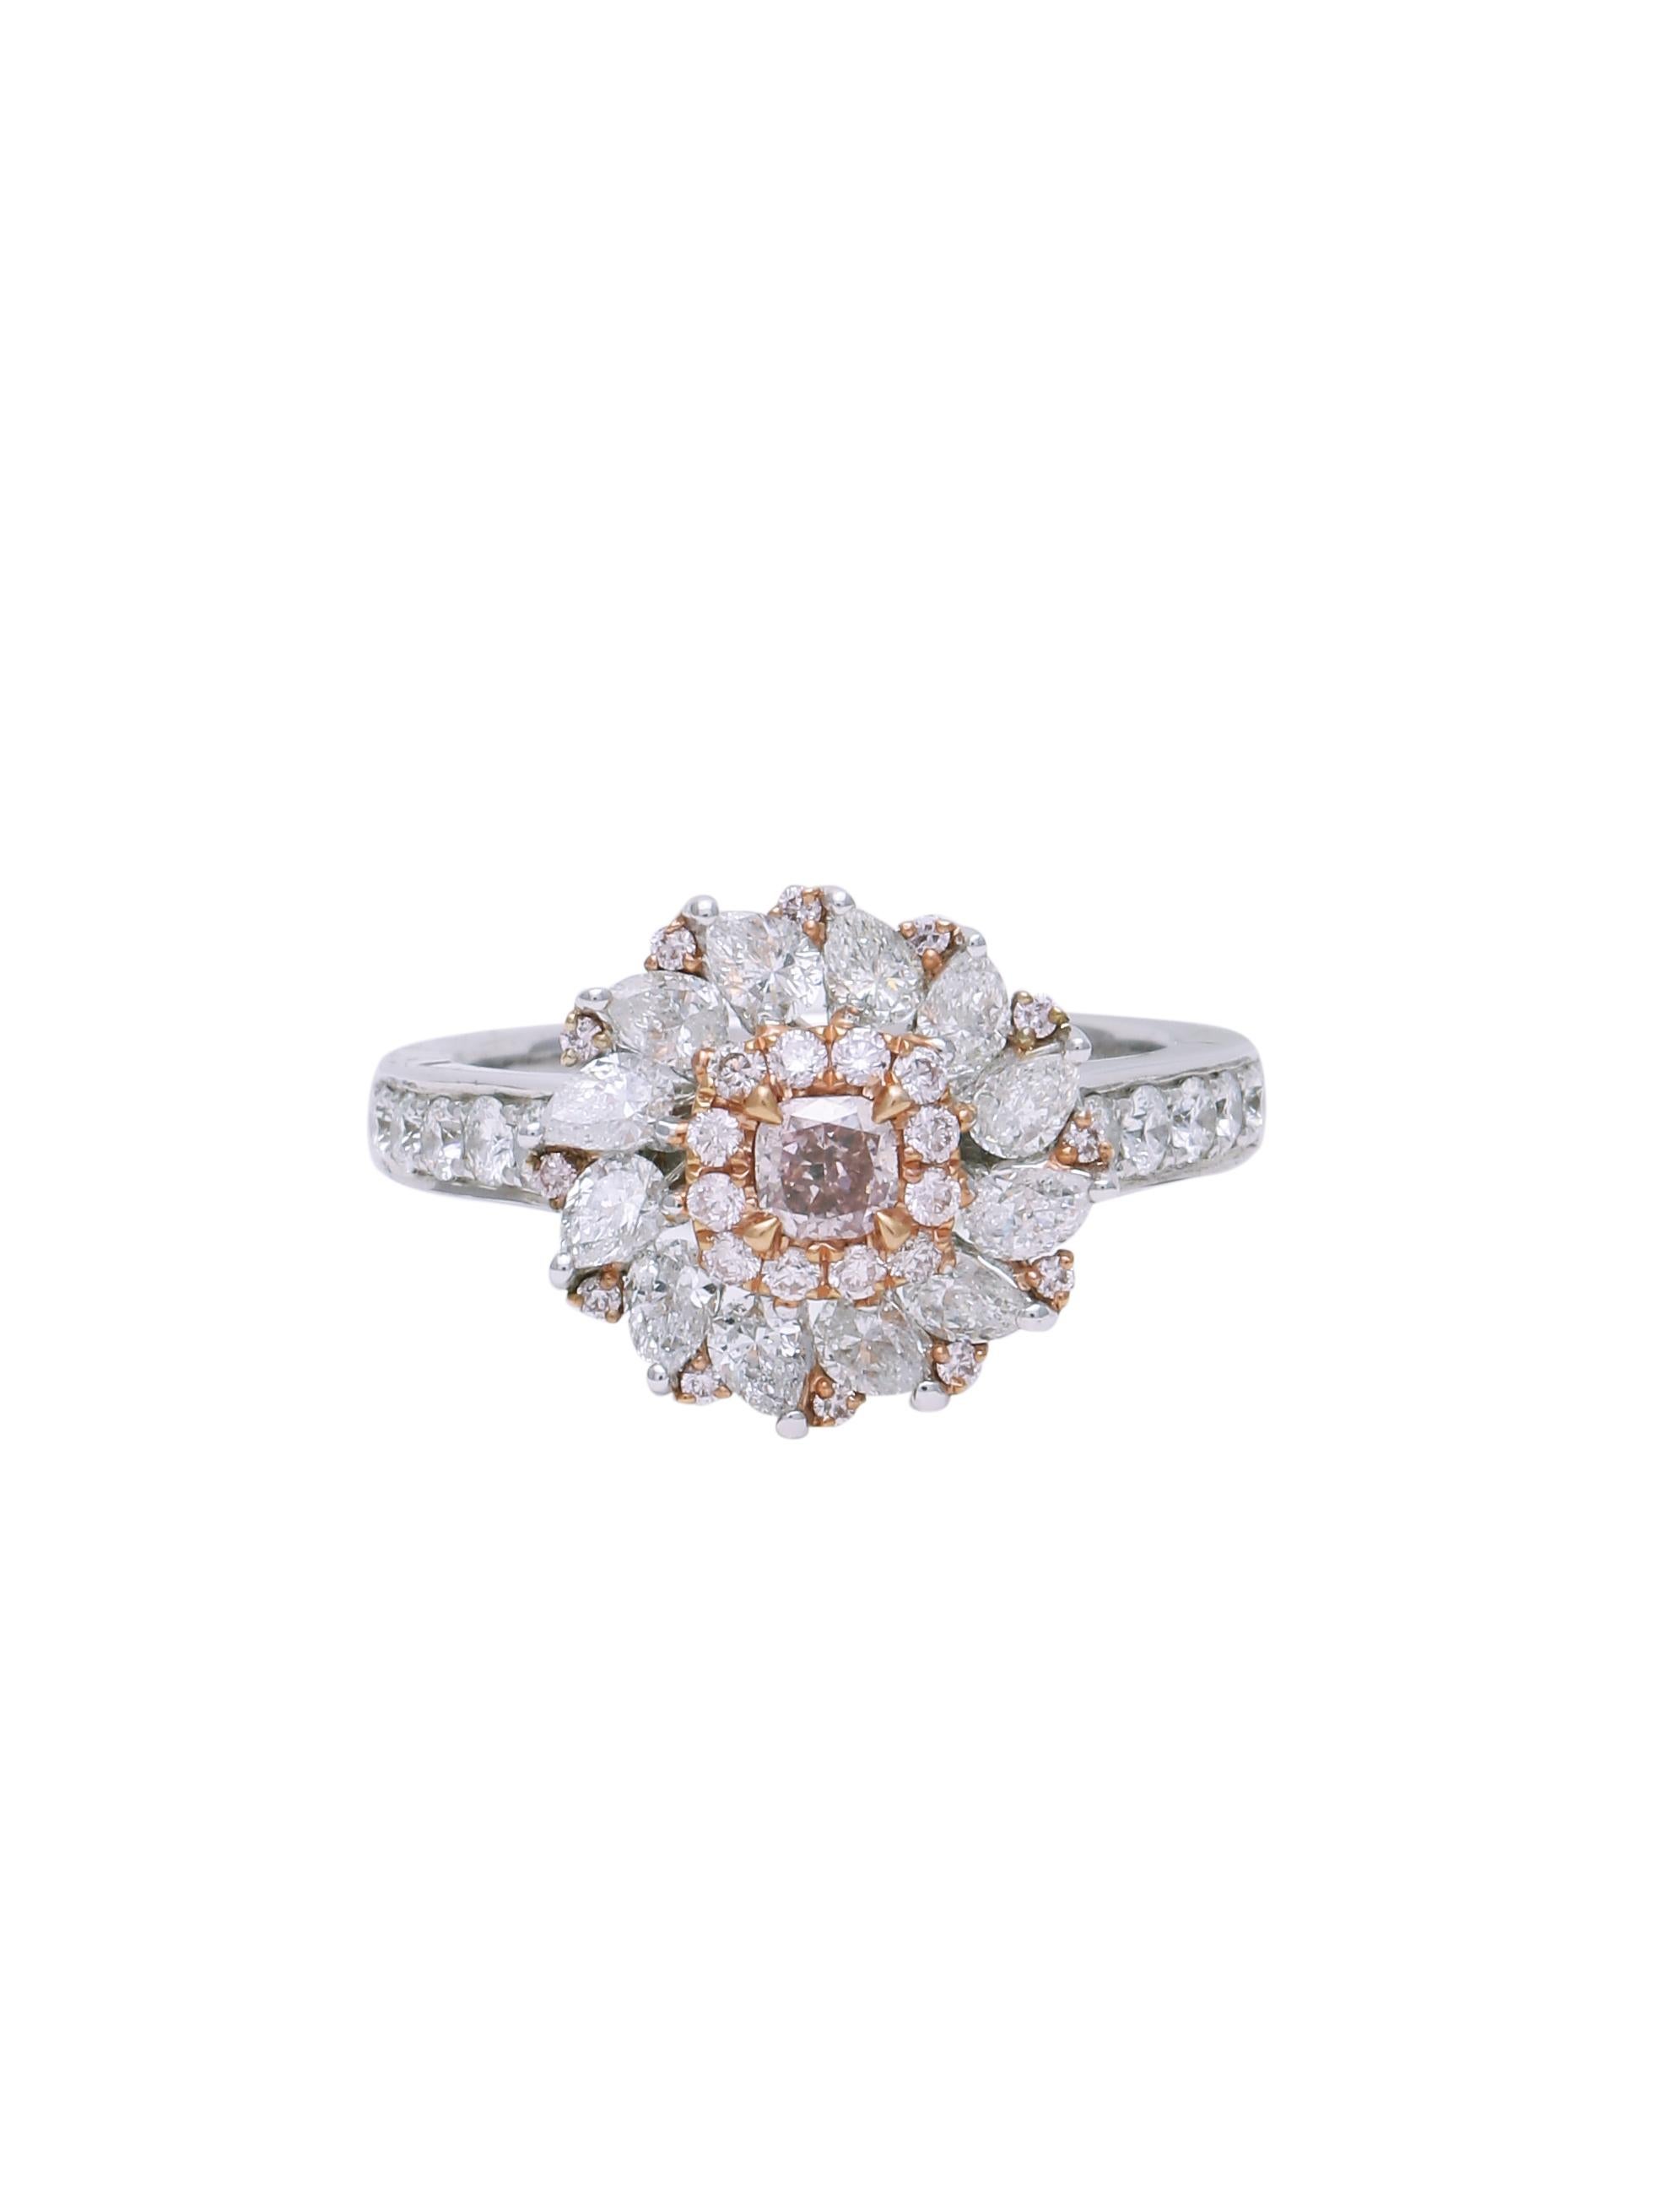 A beautiful pink diamond ring with a 0.25 carats GIA Certified Fancy Pink Diamond in the centre and a cluster of smaller white and pink diamonds around and with a line of Pear shape diamonds too. The cluster of Diamonds around the centre diamond